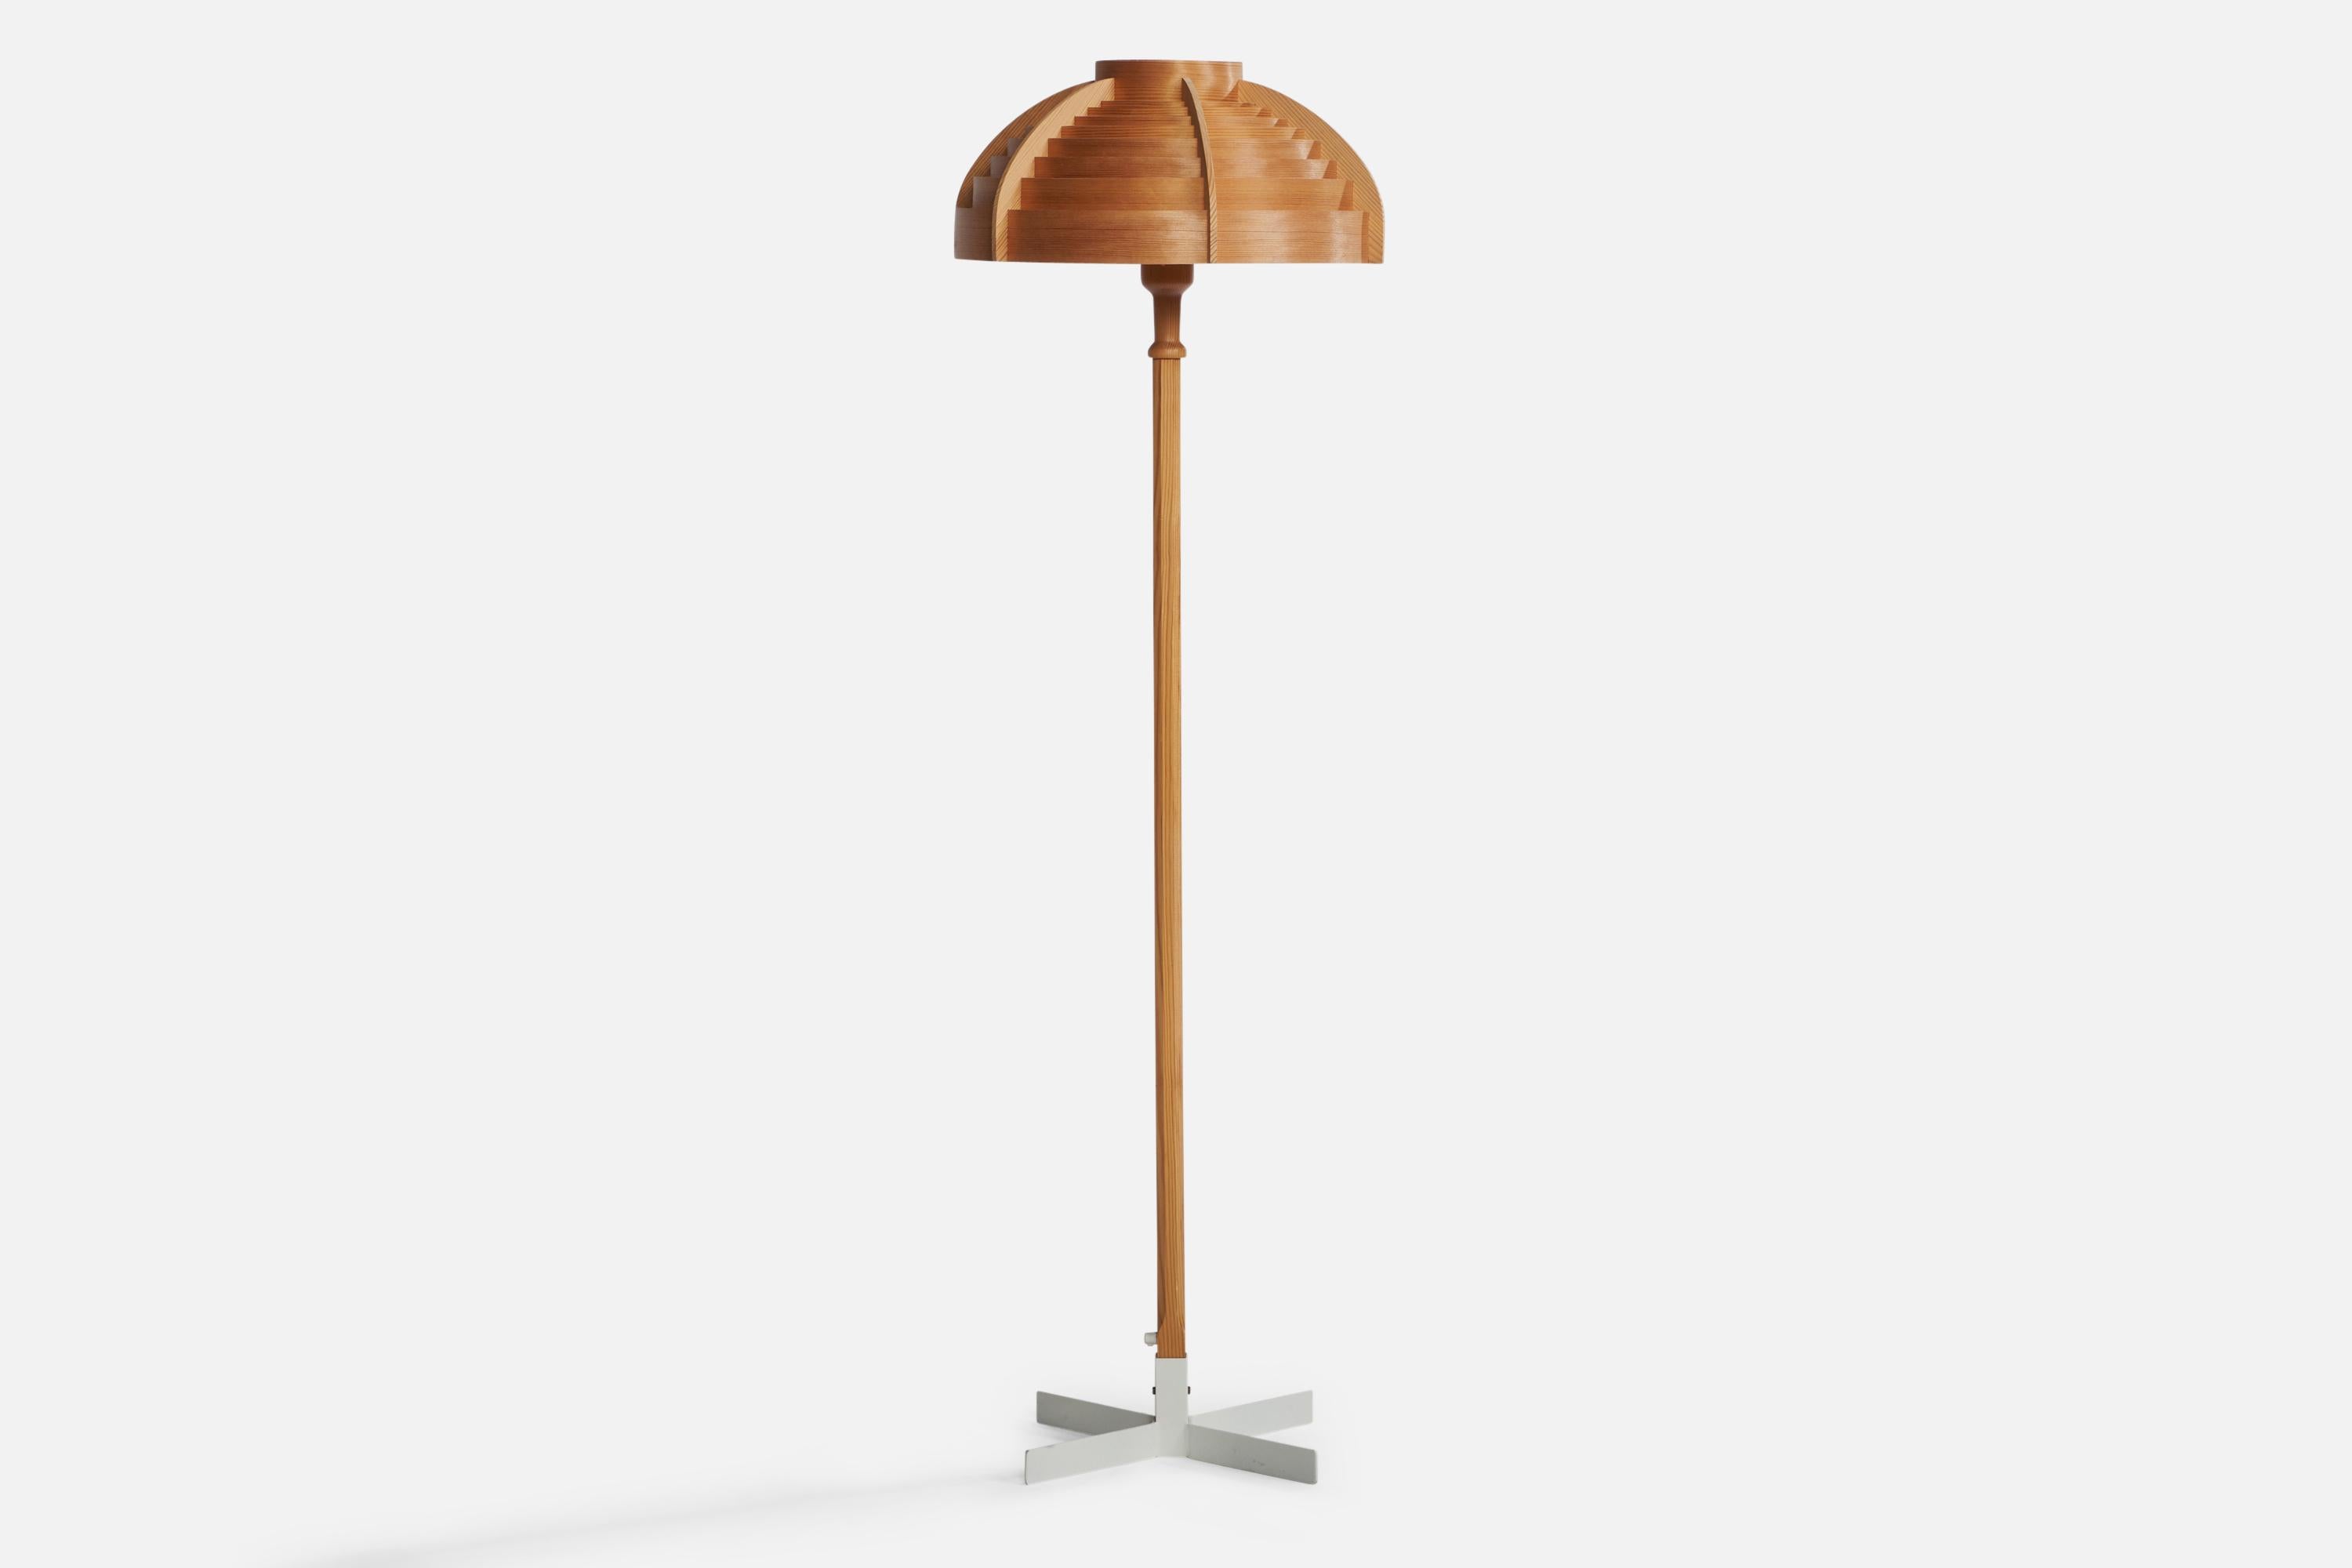 A pine, moulded pine-veneer and off-white-lacquered metal floor lamp designed and produced by Hans-Agne Jakobsson, Sweden, 1970s.

Overall Dimensions (inches): 54.35” H x 17” Diameter. Stated dimensions include shade.

Bulb Specifications: E-26